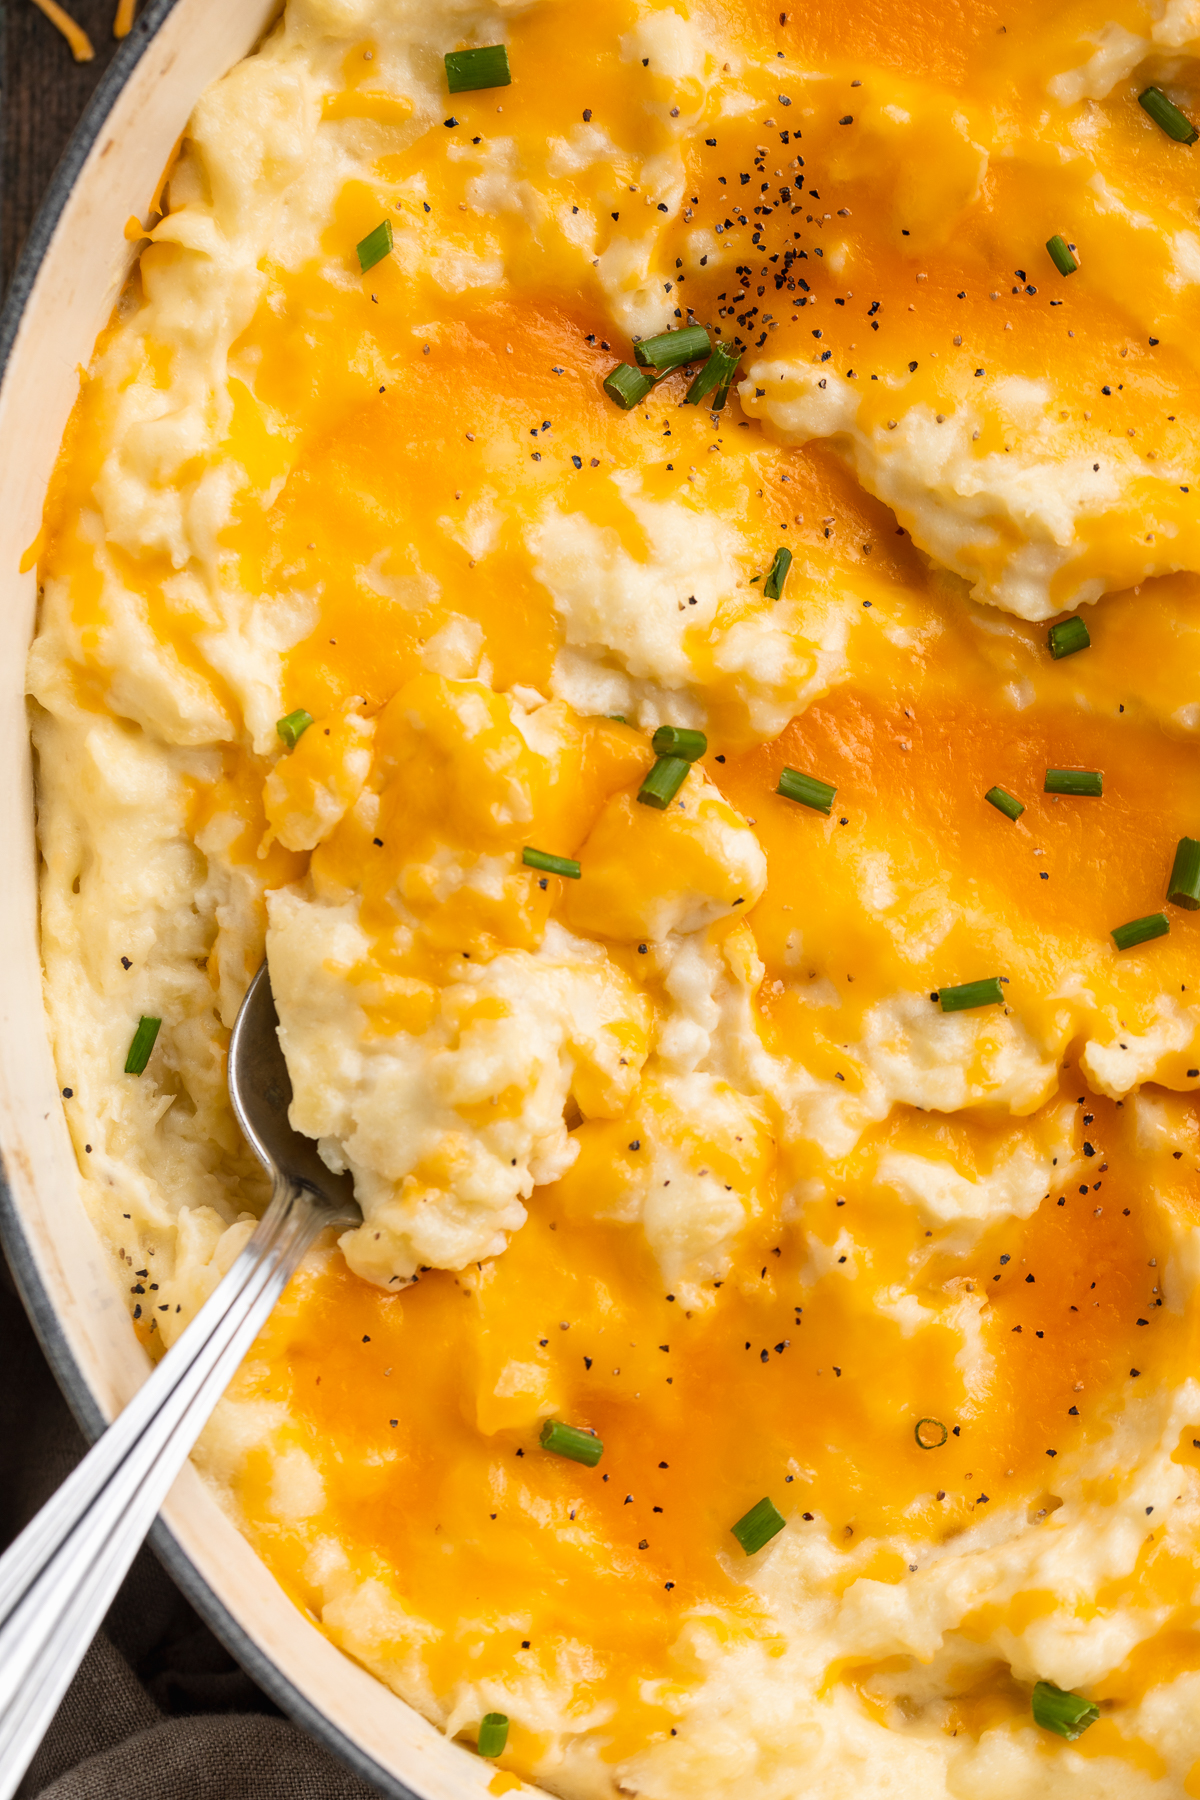 mashed potatoes with cheese